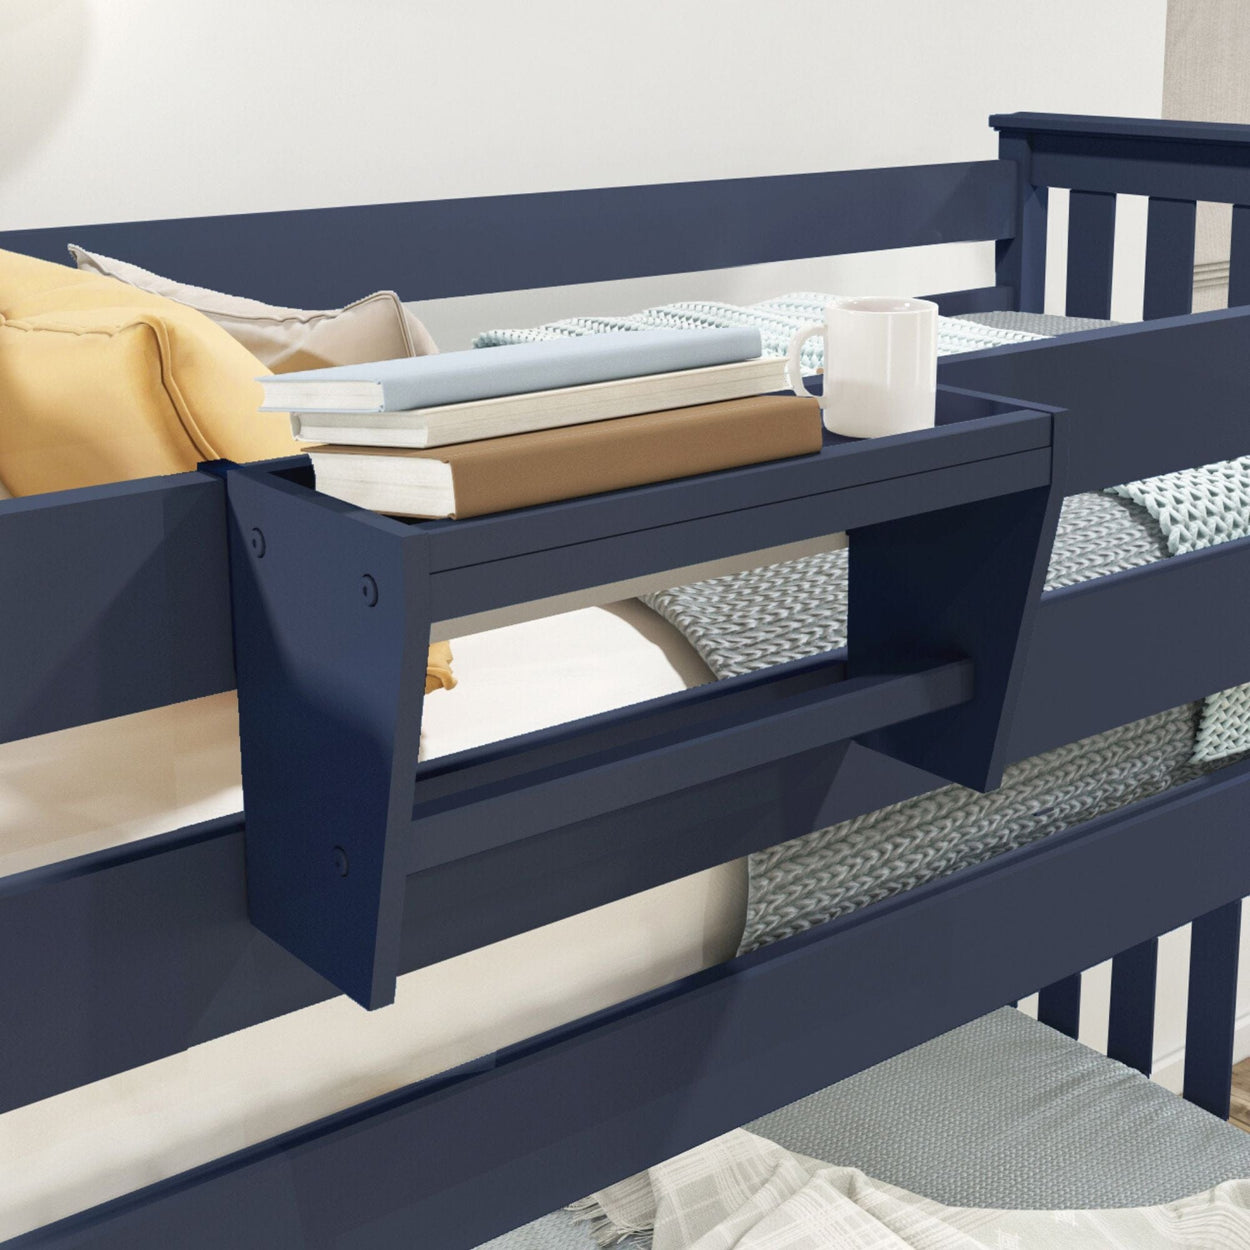 Classic Bedside Tray Accessories Plank+Beam 